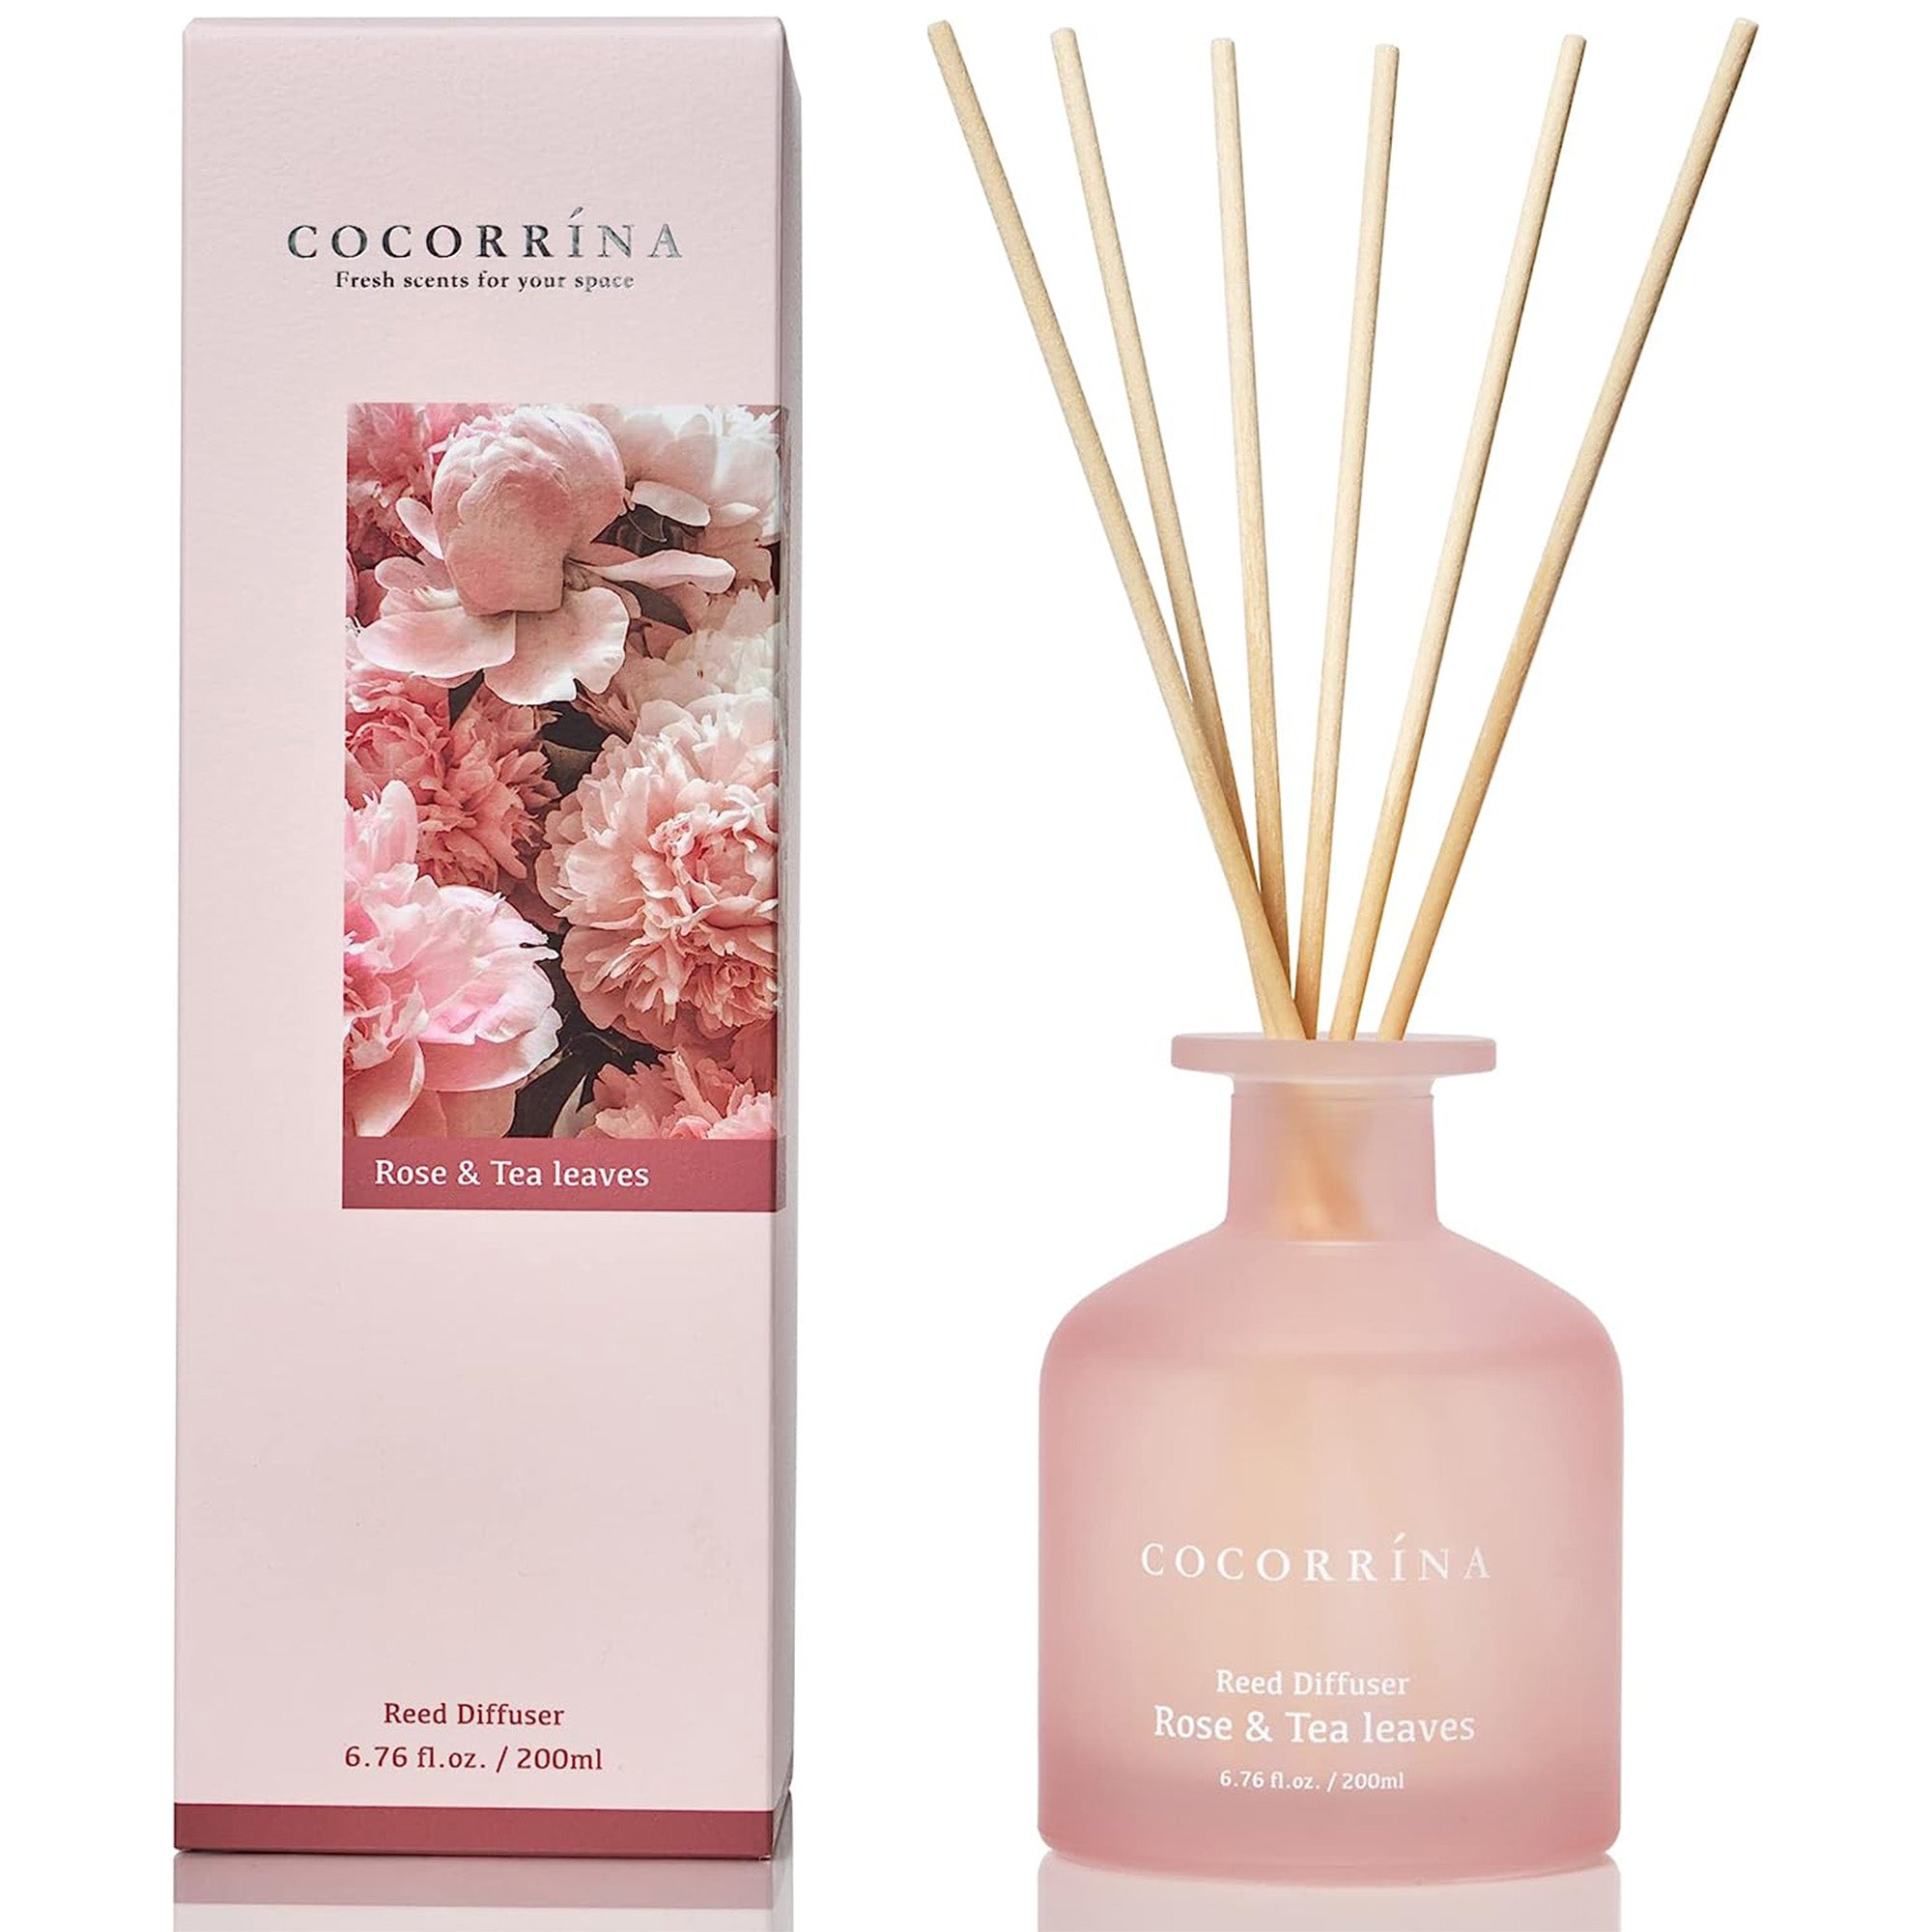 COCORRÍNA Rose & Tea Leaves Reed Diffuser